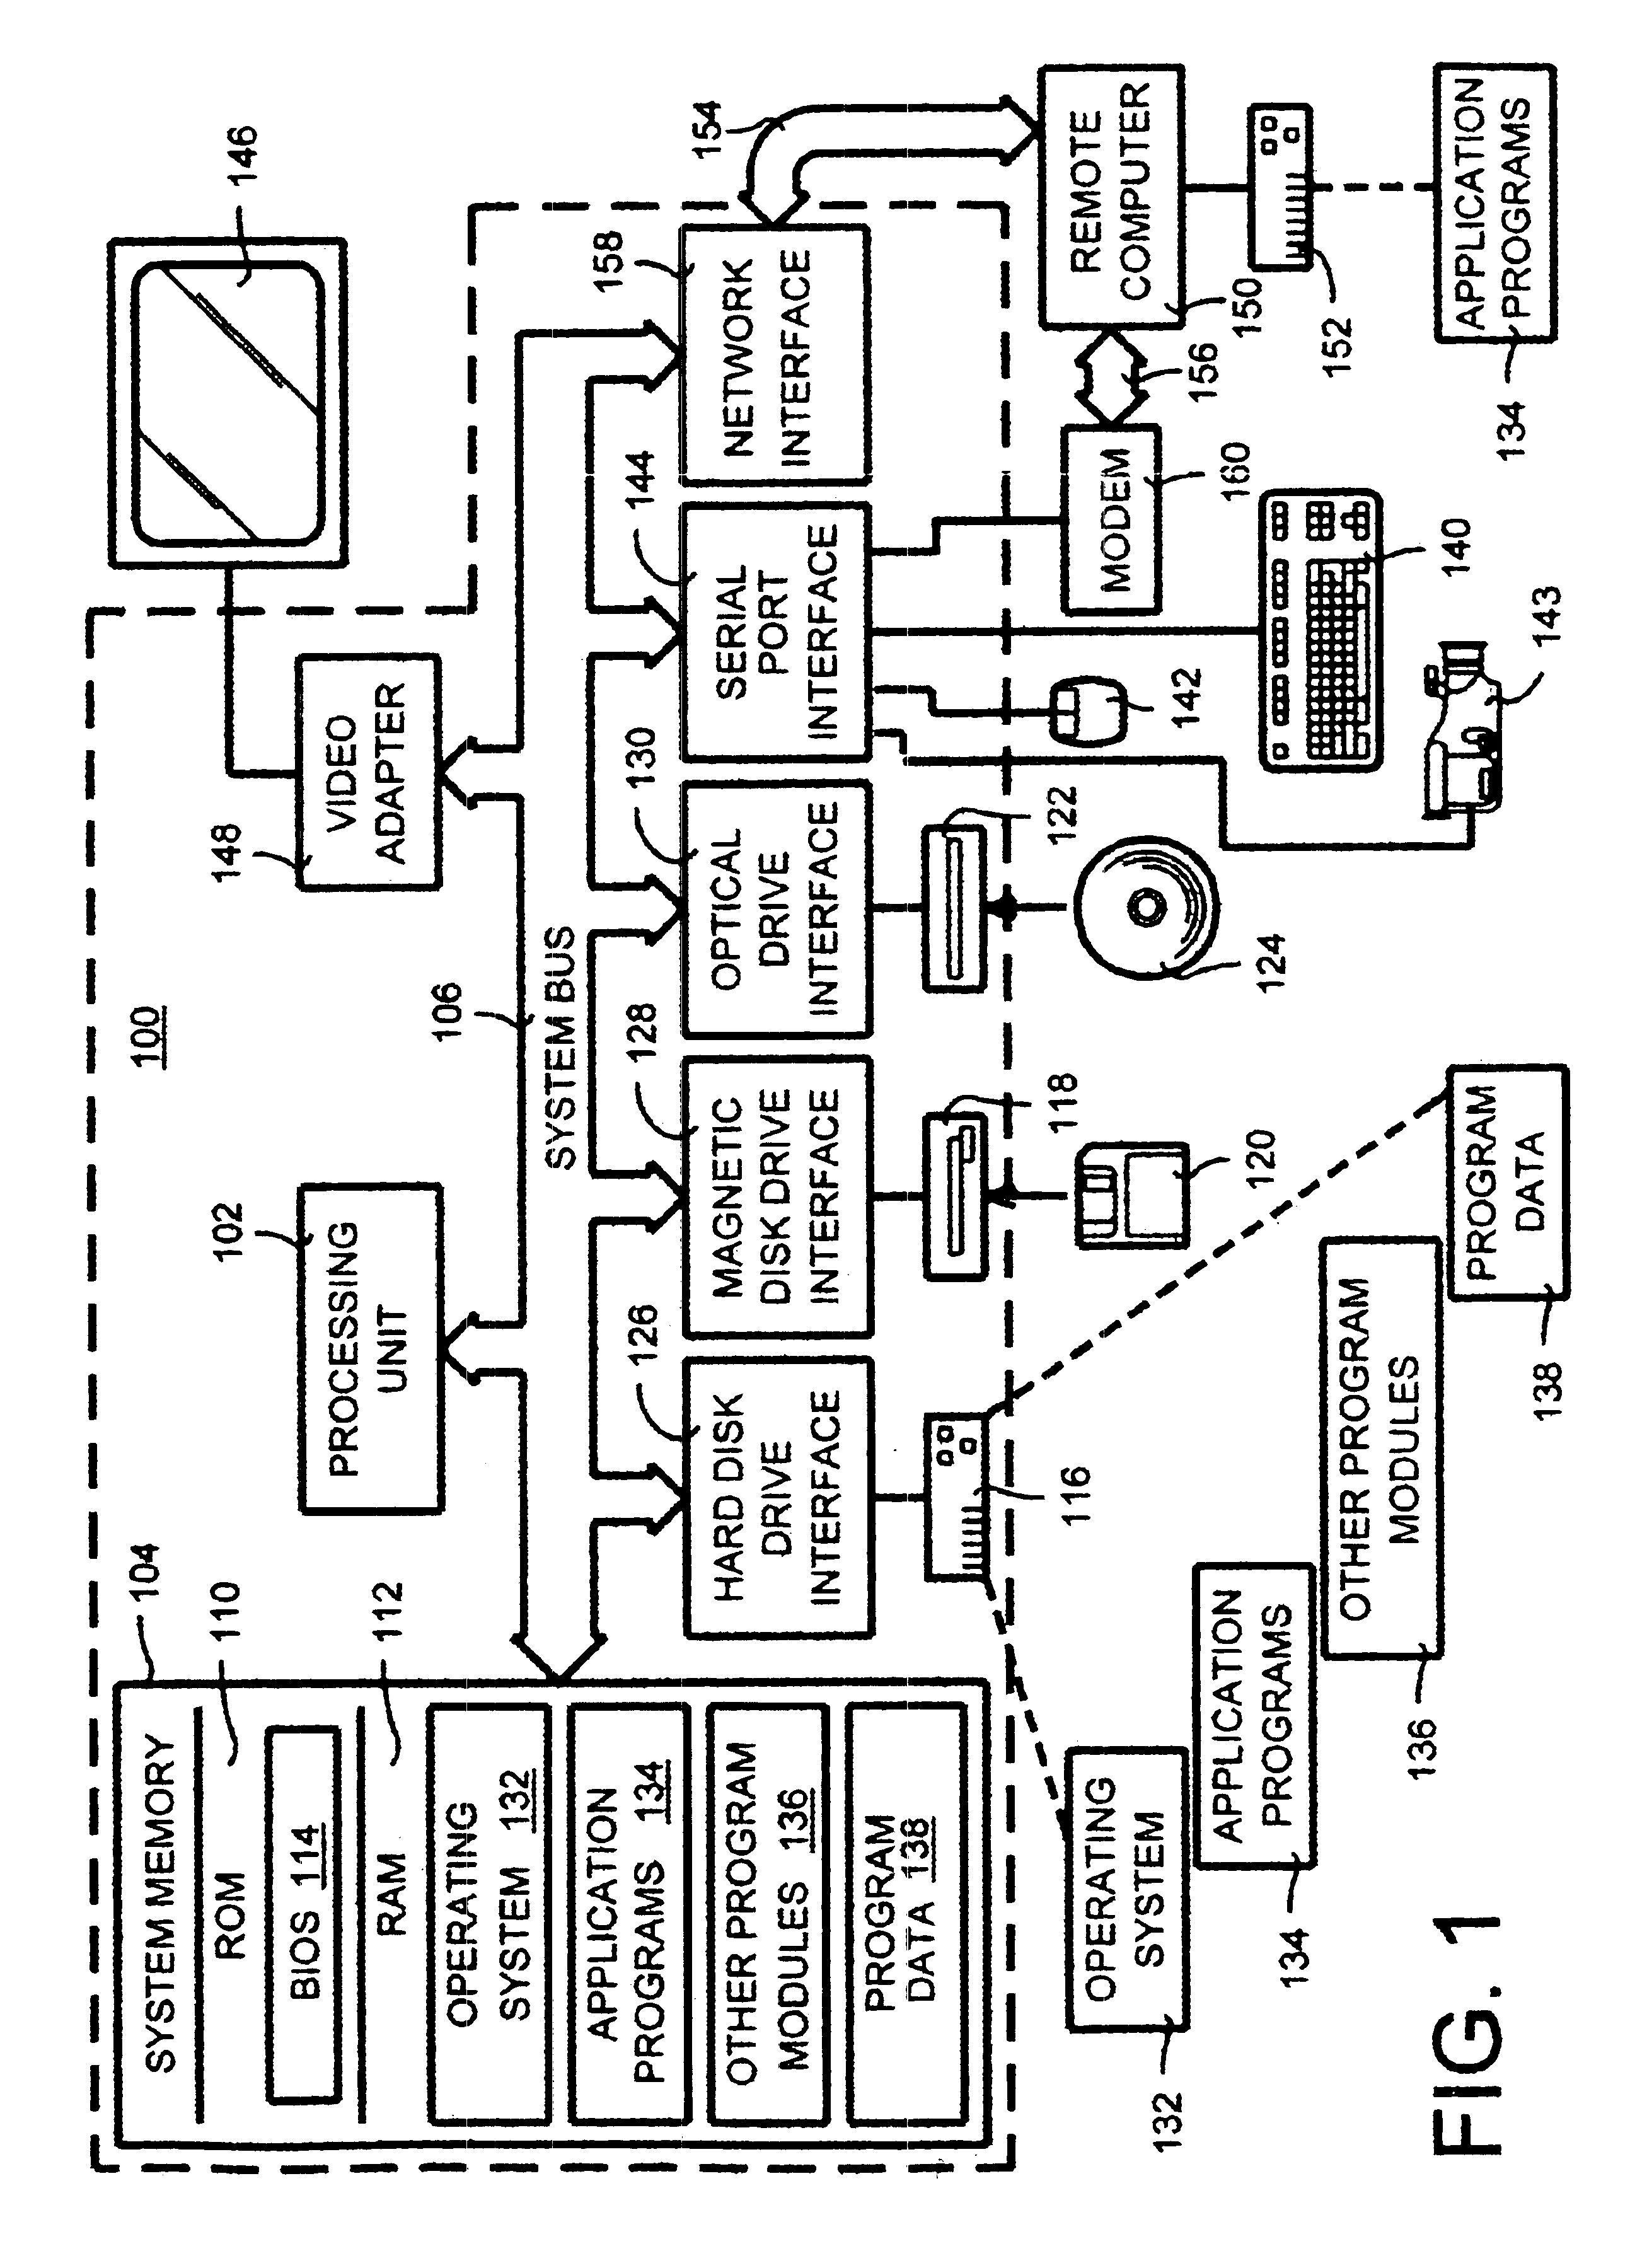 Method and system for obtaining visual information from an image sequence using visual tunnel analysis